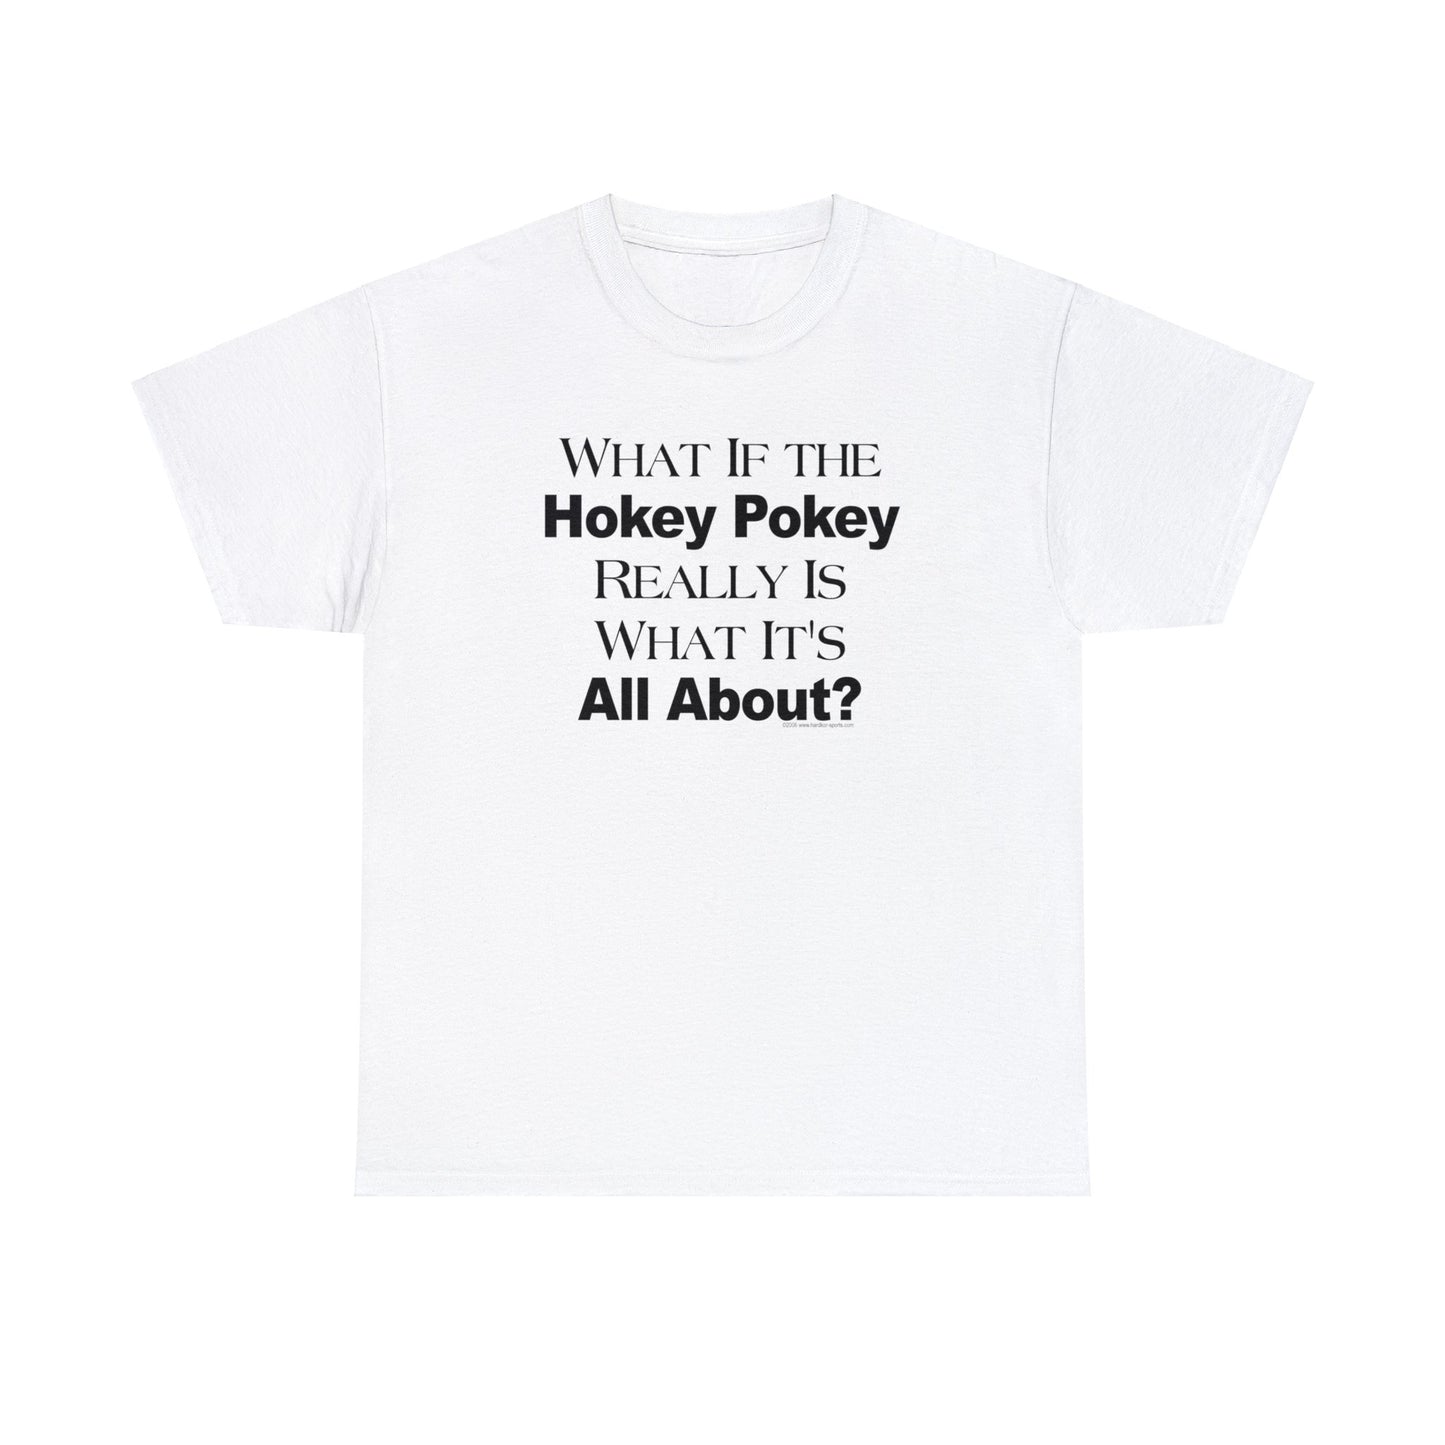 What if the Hokey Pokey Really Is What It's All About T-Shirt, Thoughtful T-Shirt, Funny Adult T-Shirt, Humorous Tee, Funny T-Shirt Gift